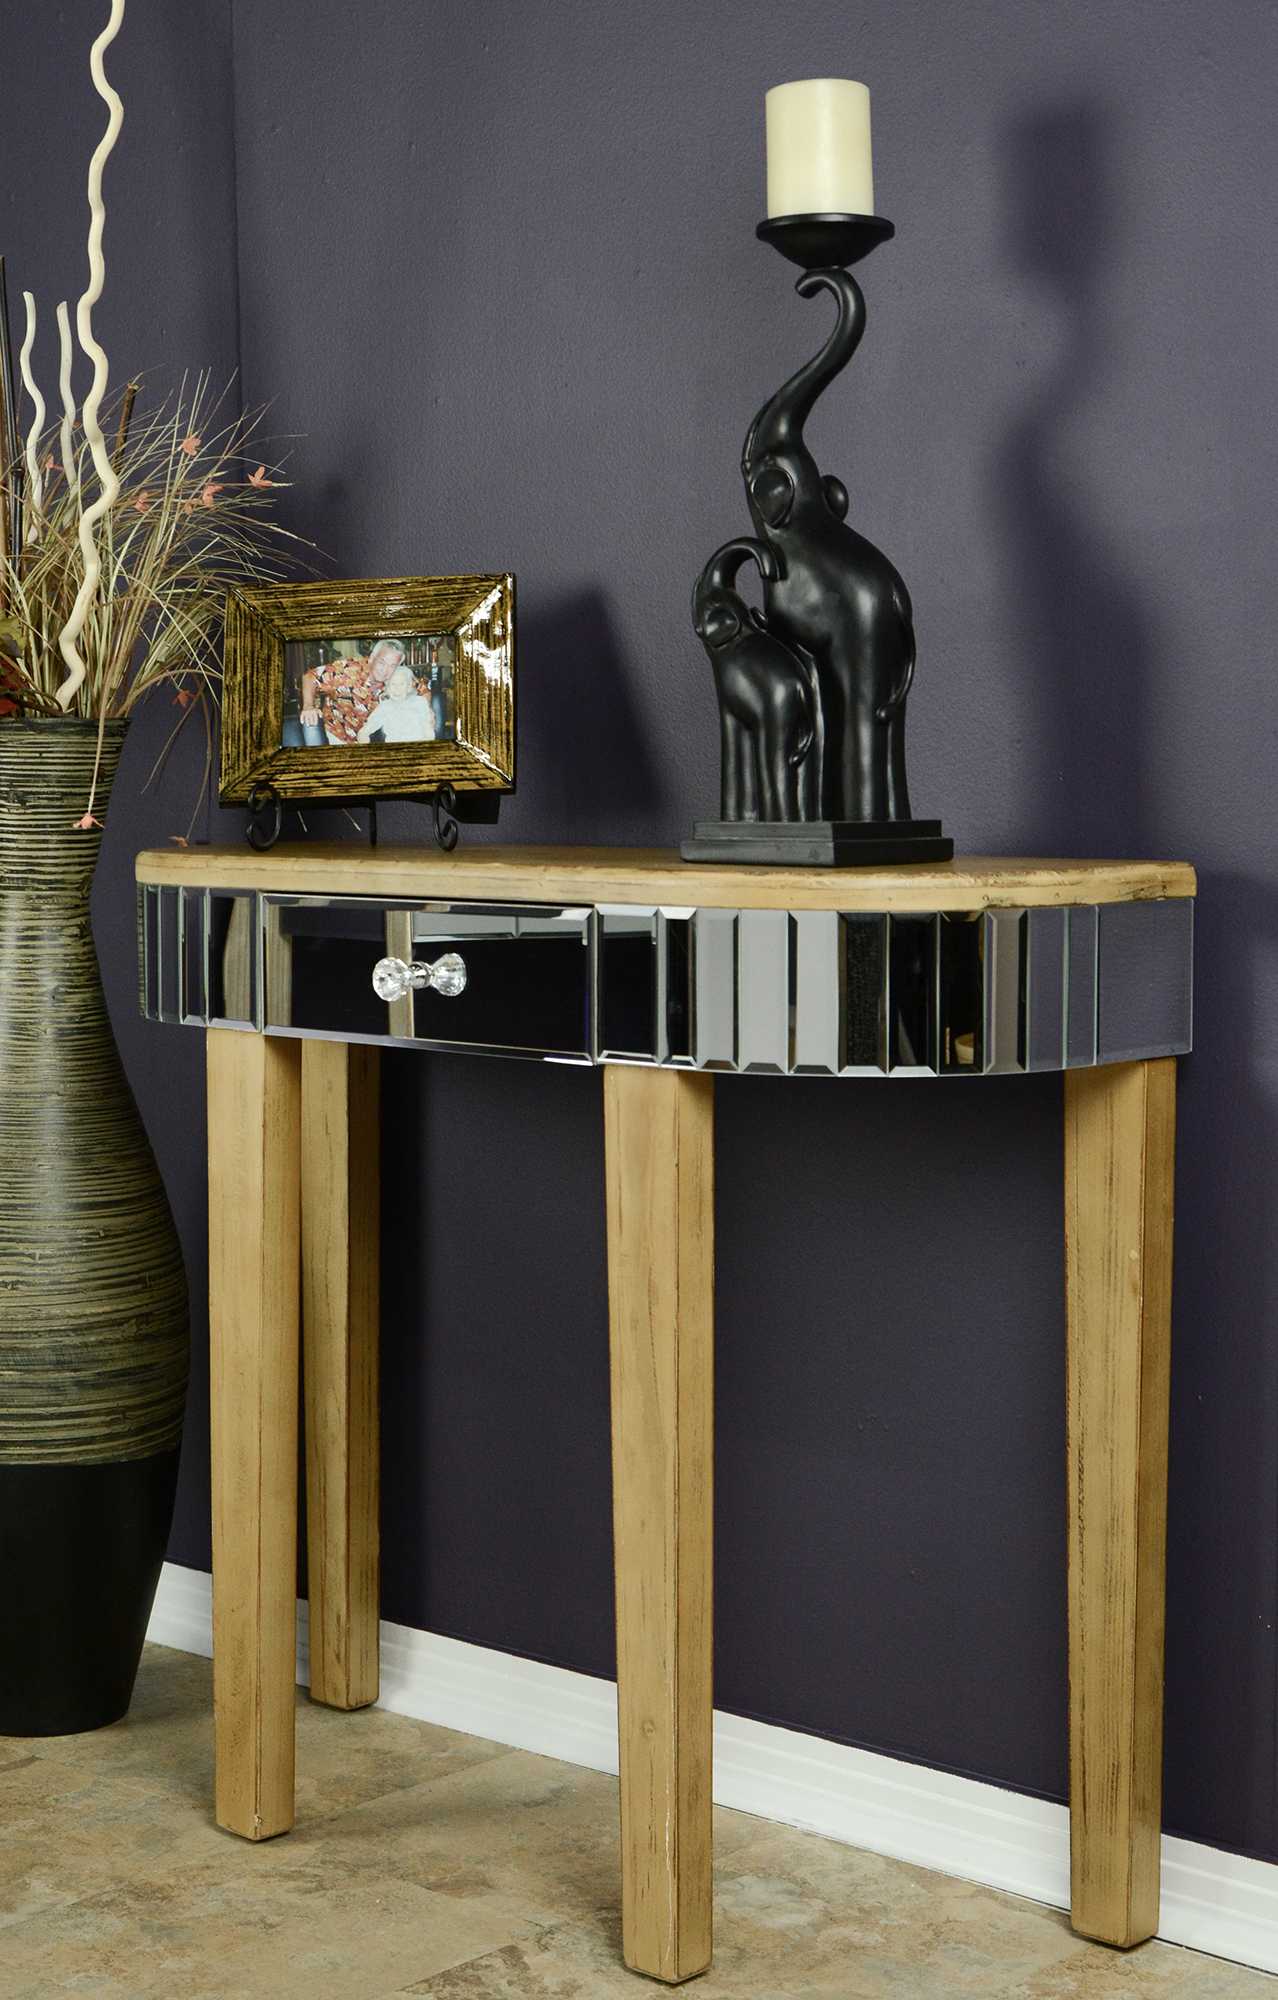 35.5" X 13" X 31" Distressed Brown MDF Wood Mirrored Glass Console Table with a Mirrored Glass Top and a Drawer